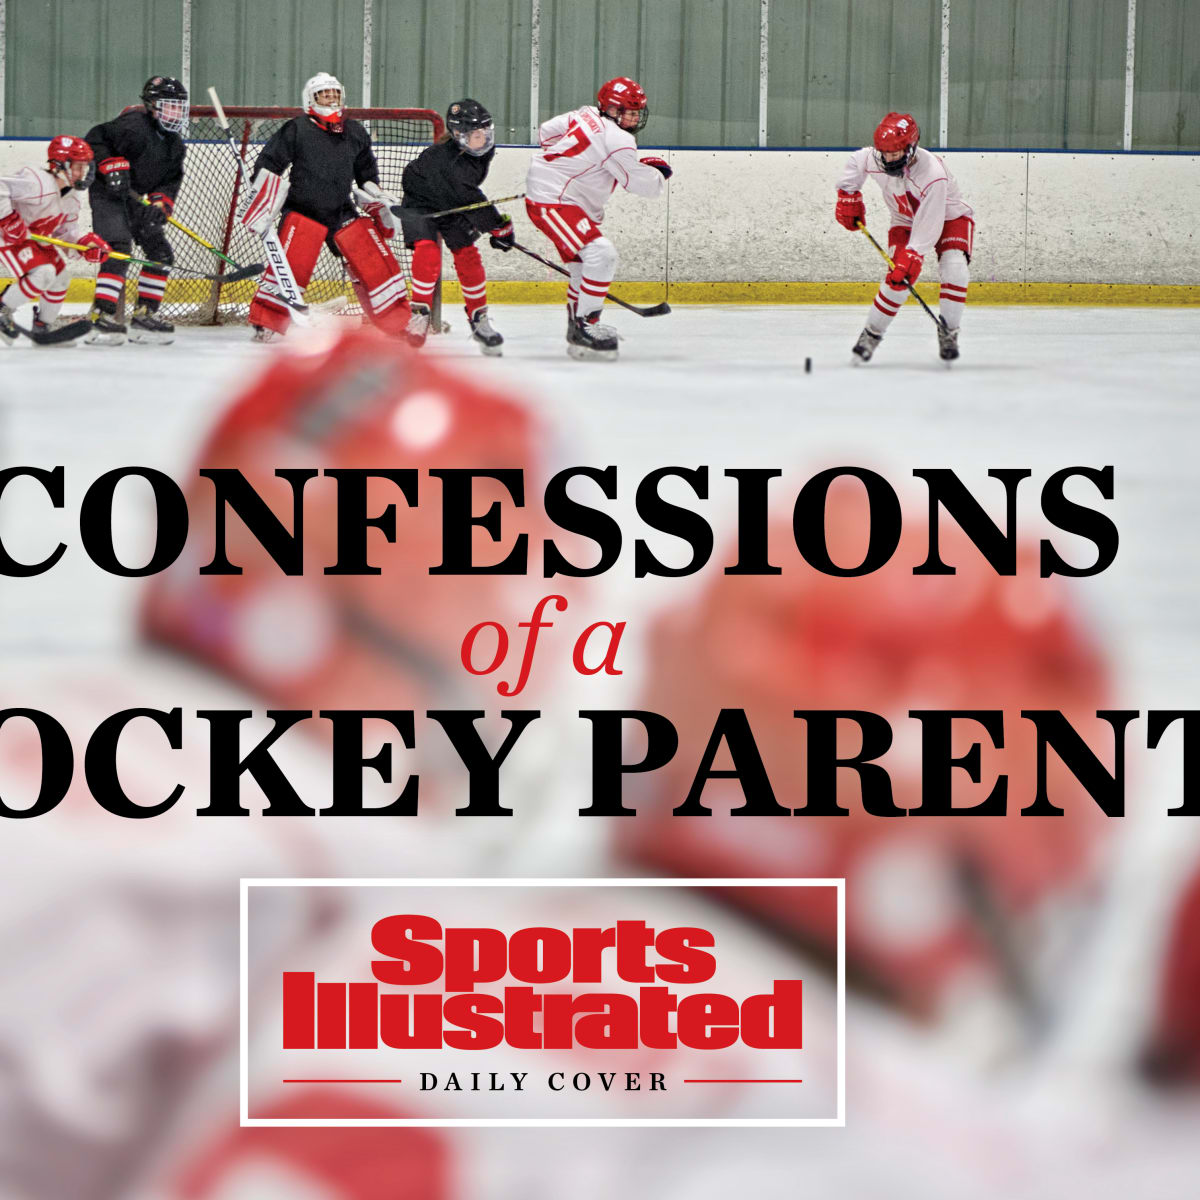 100 Fun Facts About Hockey Your Kids Will Love (2023) - Milwaukee with Kids